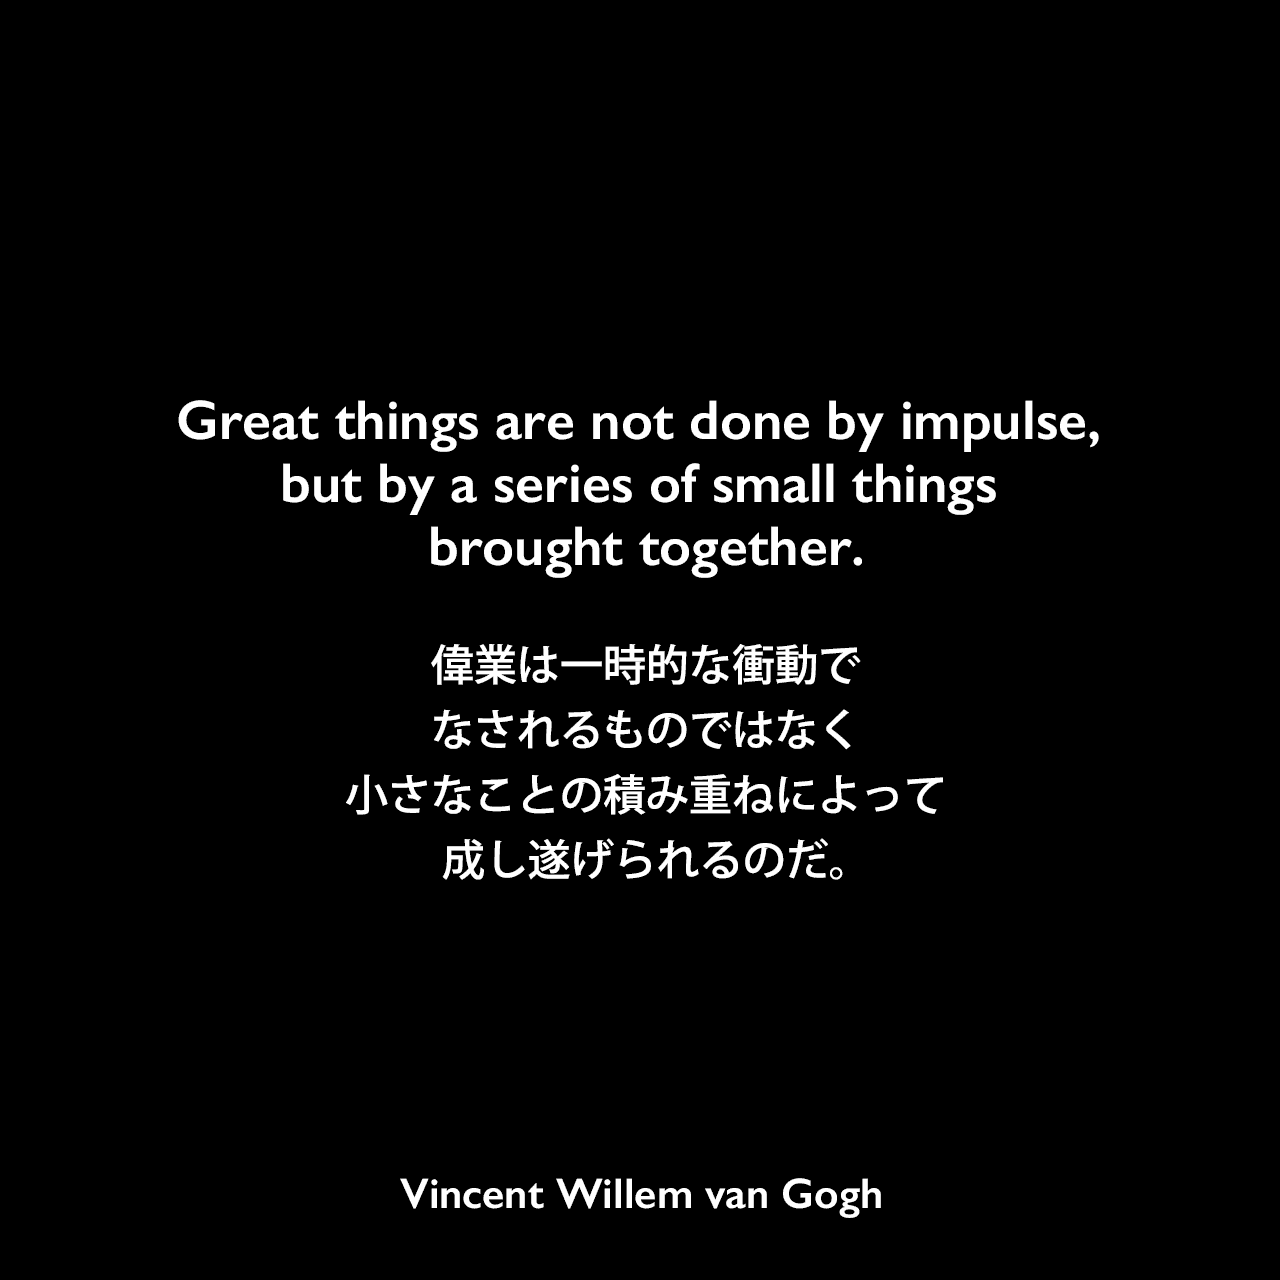 Great things are not done by impulse, but by a series of small things brought together.偉業は一時的な衝動でなされるものではなく、小さなことの積み重ねによって成し遂げられるのだ。- ゴッホの弟テオへ宛てた手紙より